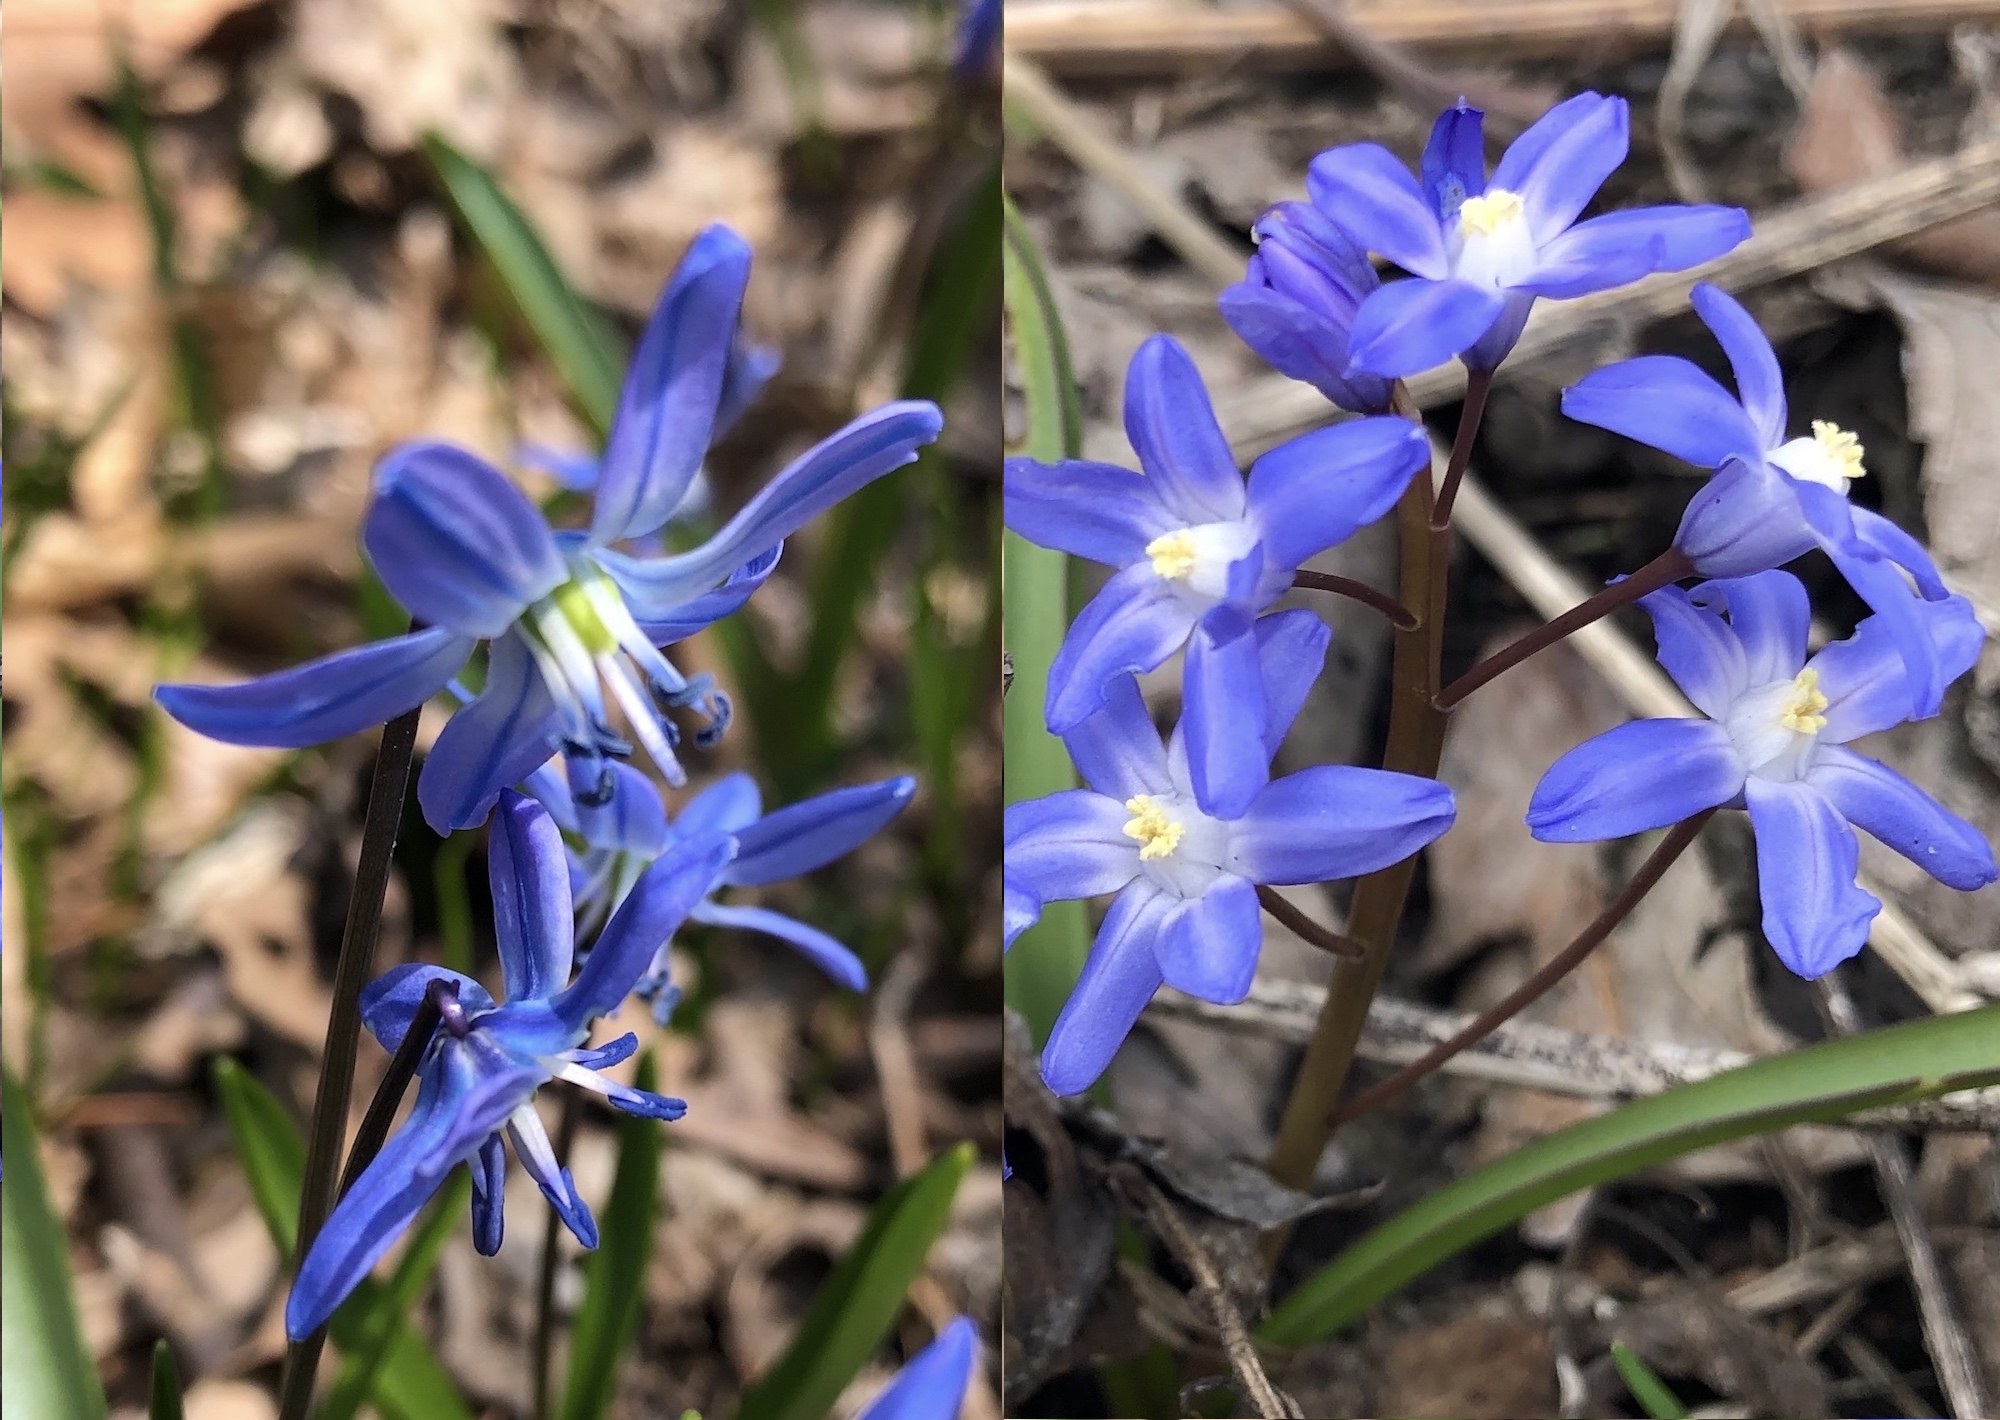 Siberian Squill and Glory-of-the-Snow comparison.